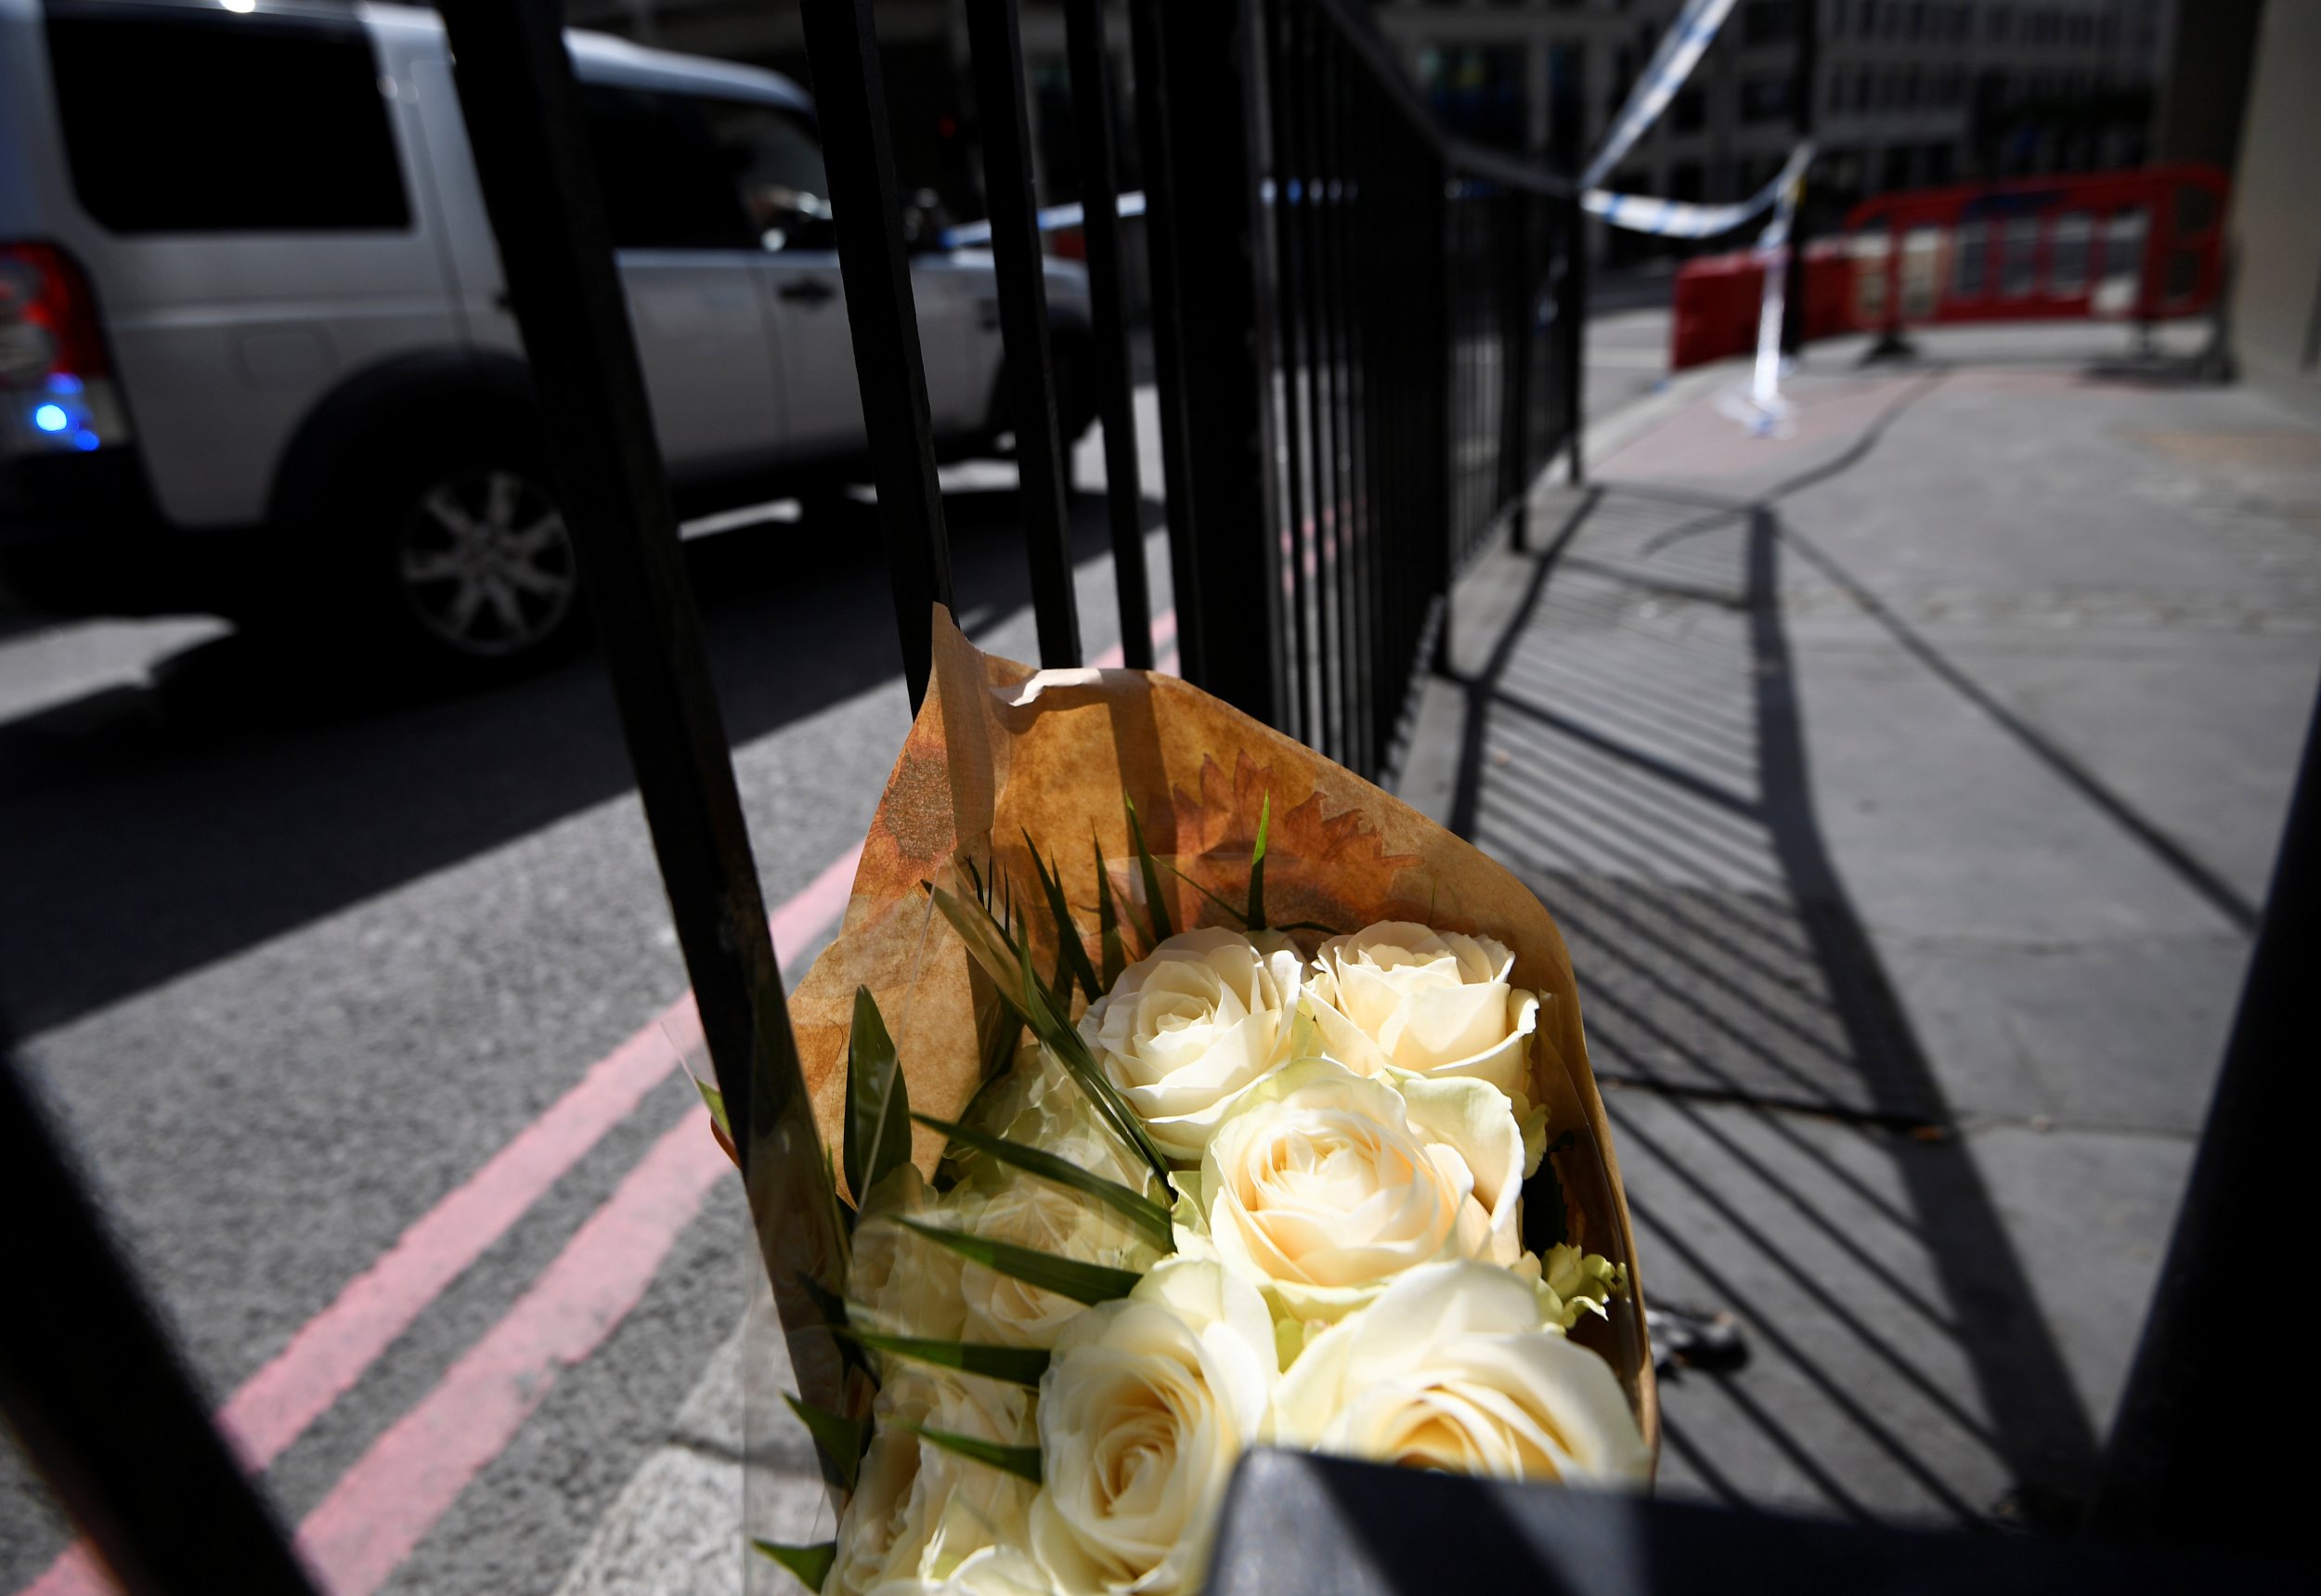 London attack flowers